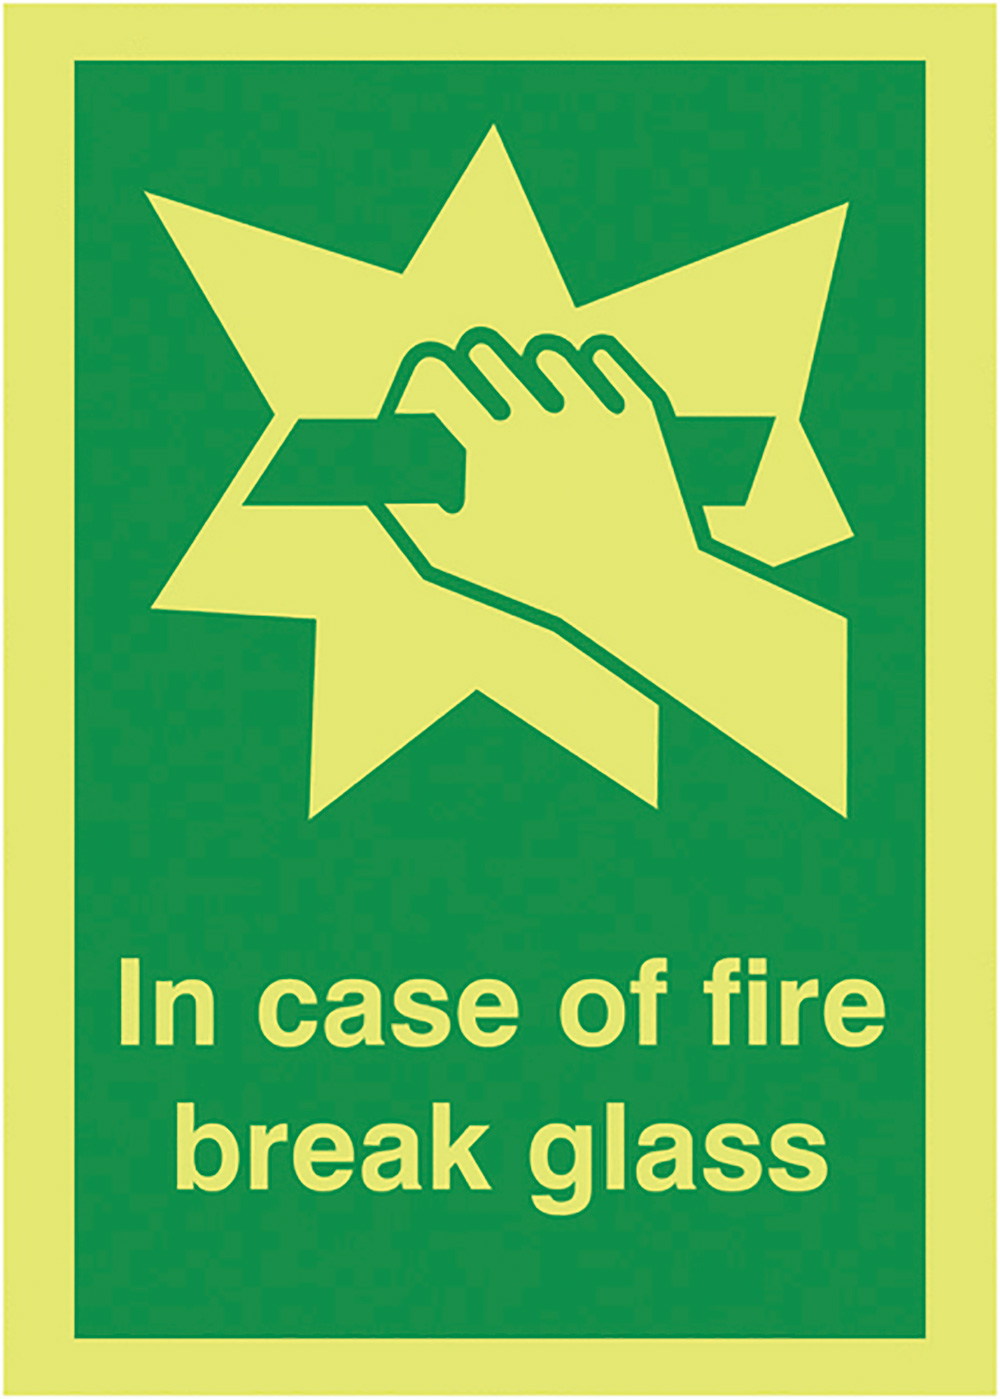 In Case of Fire Break Glass 150 x 125mm - Nite Glo Safety Sign